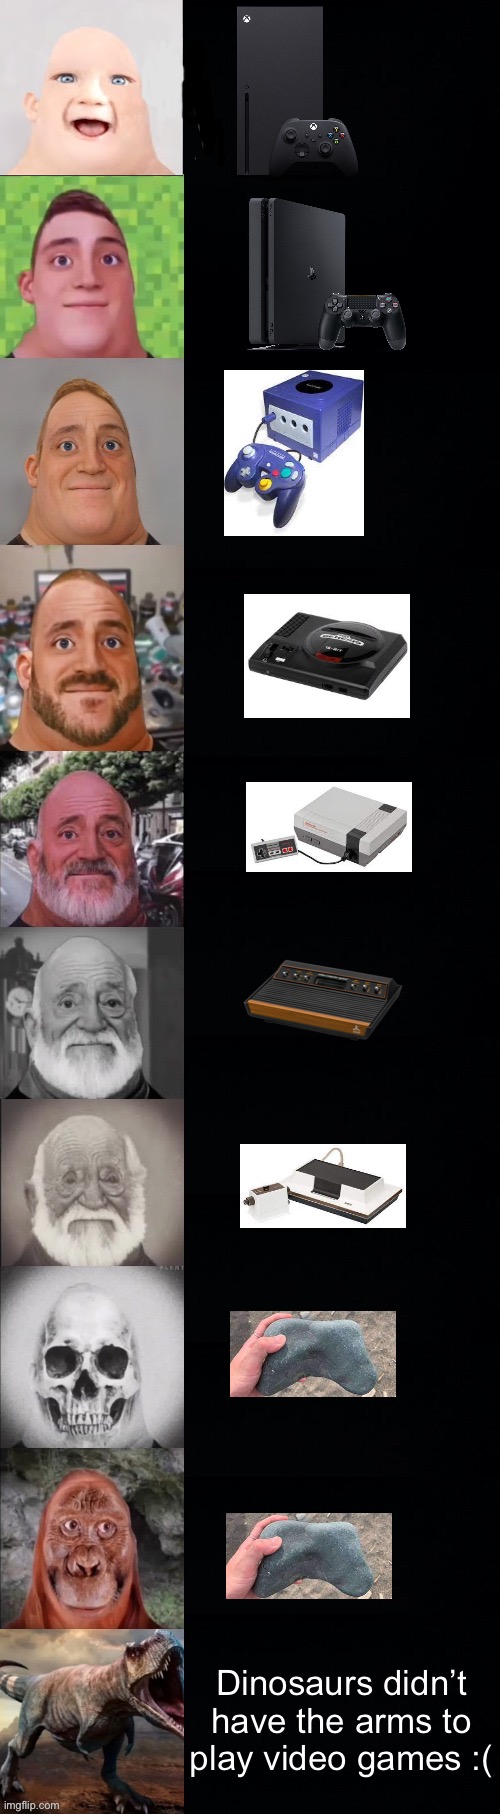 Mr incredible becoming old (your first video game console) | Dinosaurs didn’t have the arms to play video games :( | image tagged in mr incredible becoming old | made w/ Imgflip meme maker